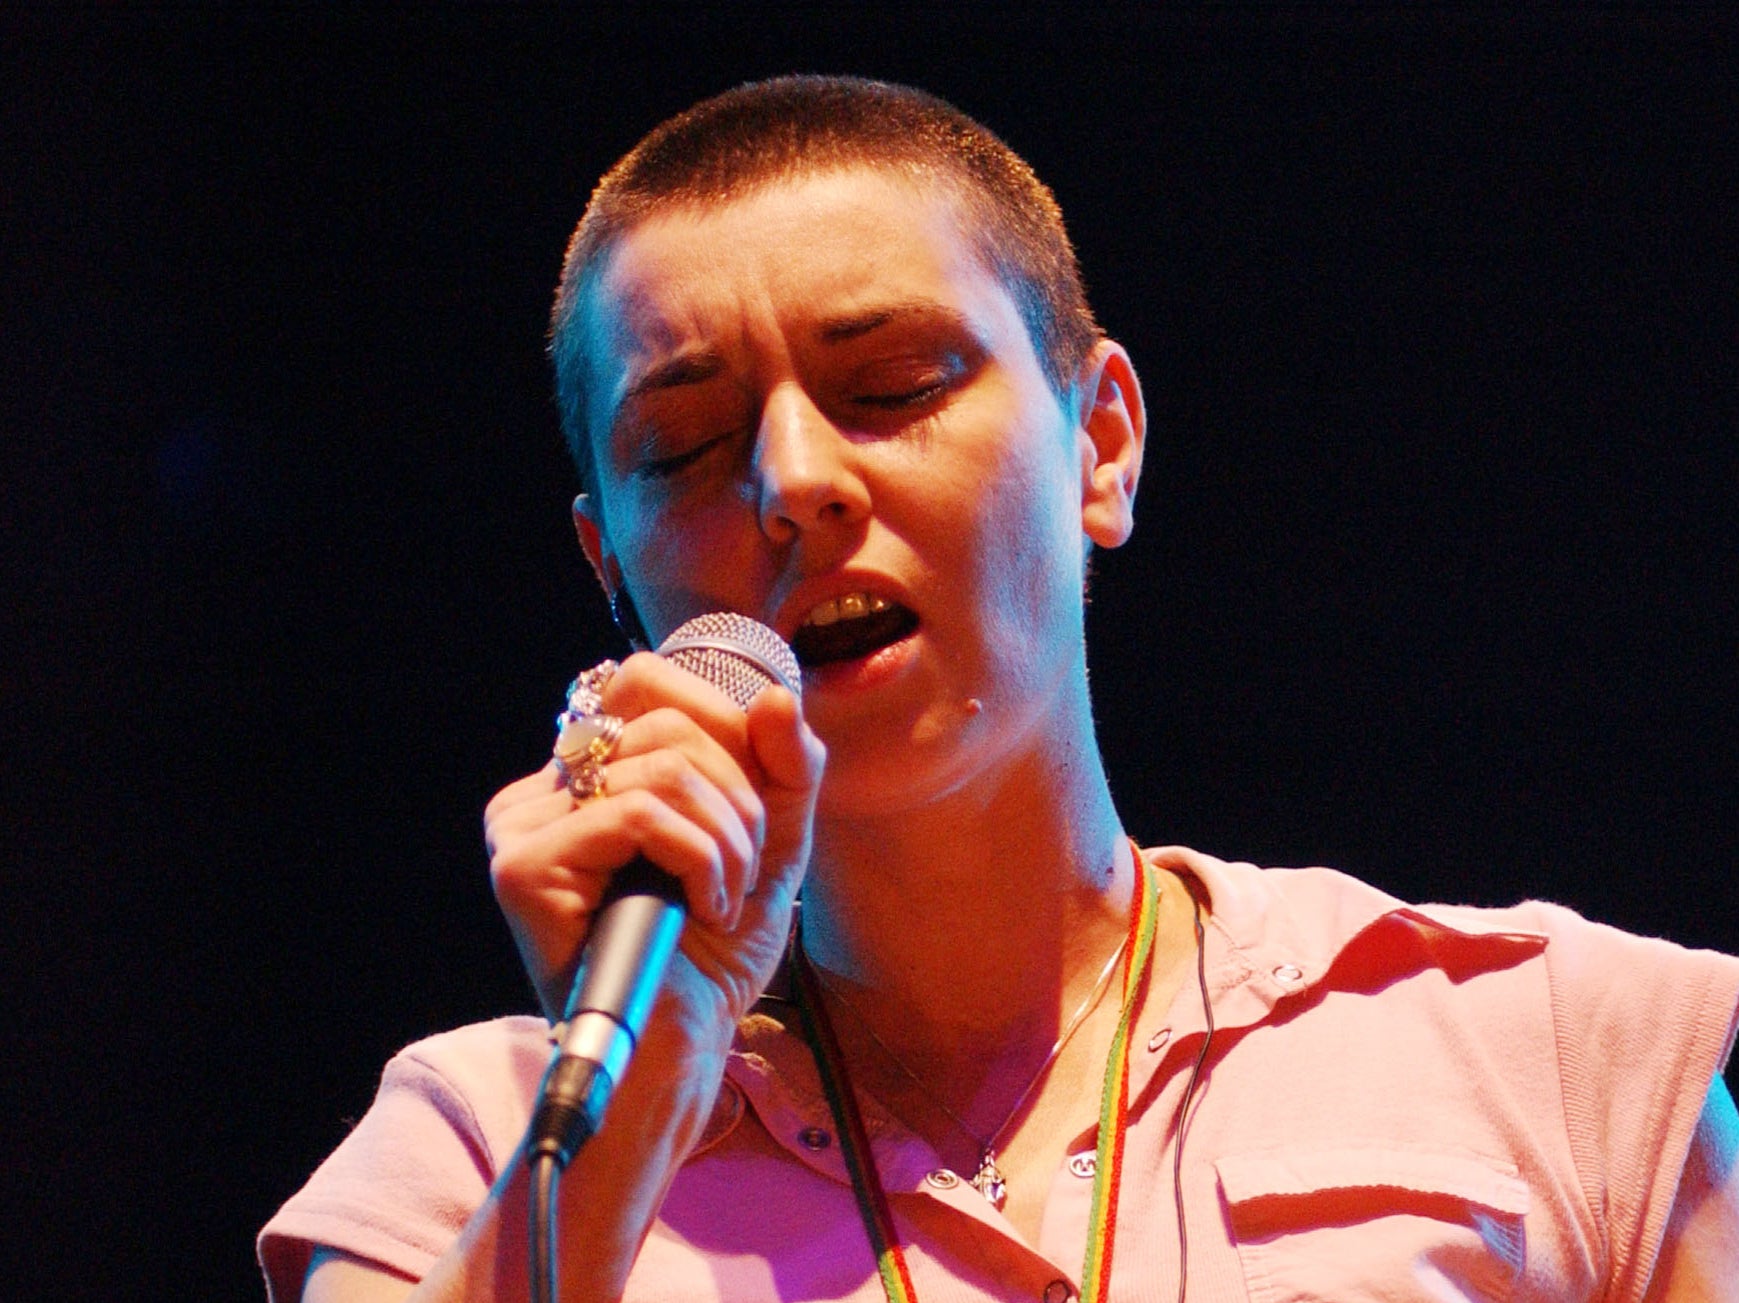 O’Connor, on stage in 2003